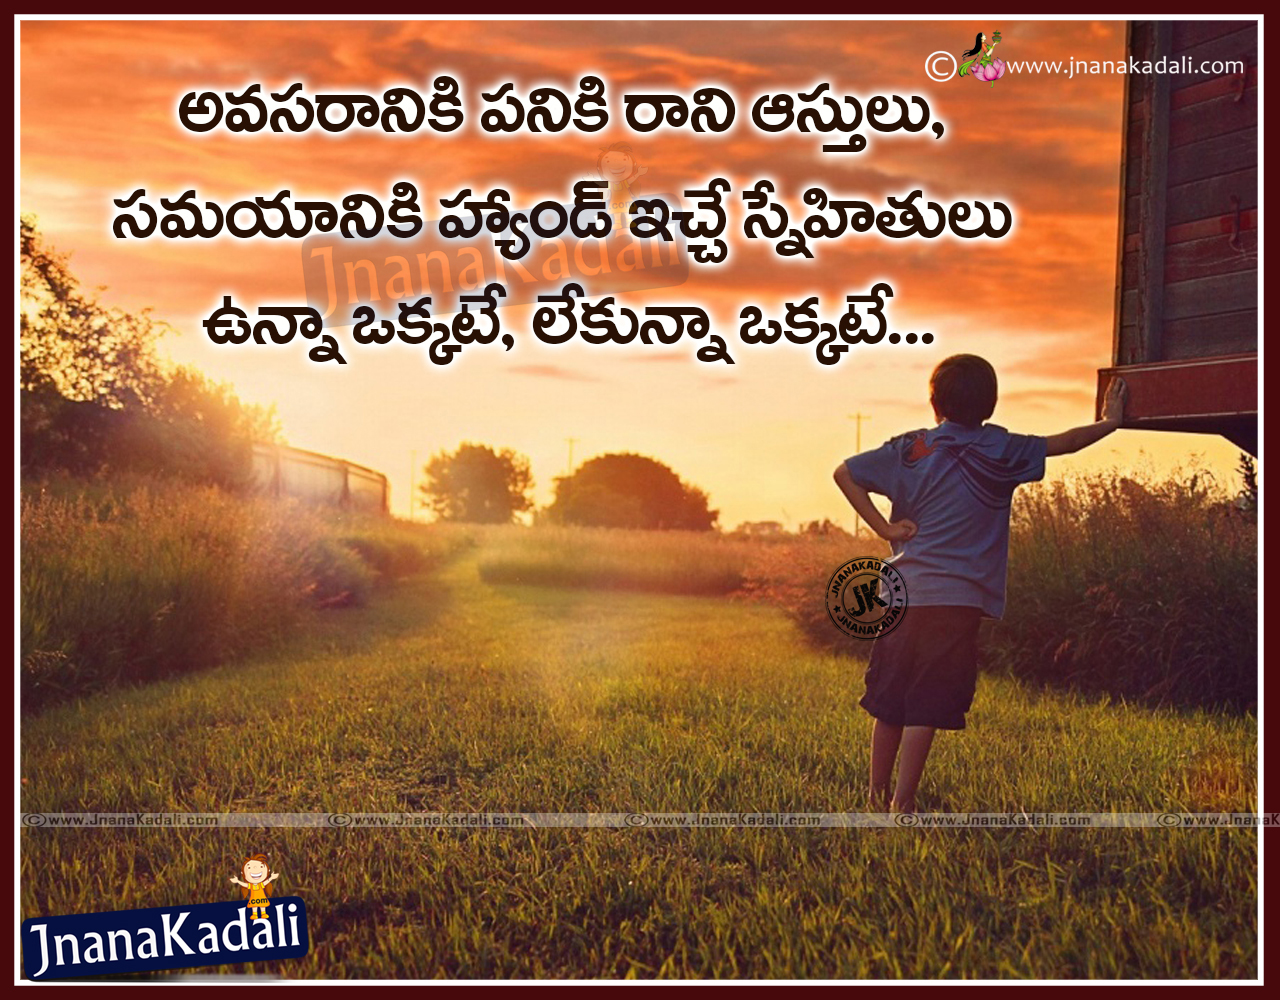 Telugu friendship day Quotes messages with cute boy hd wallpapers ...